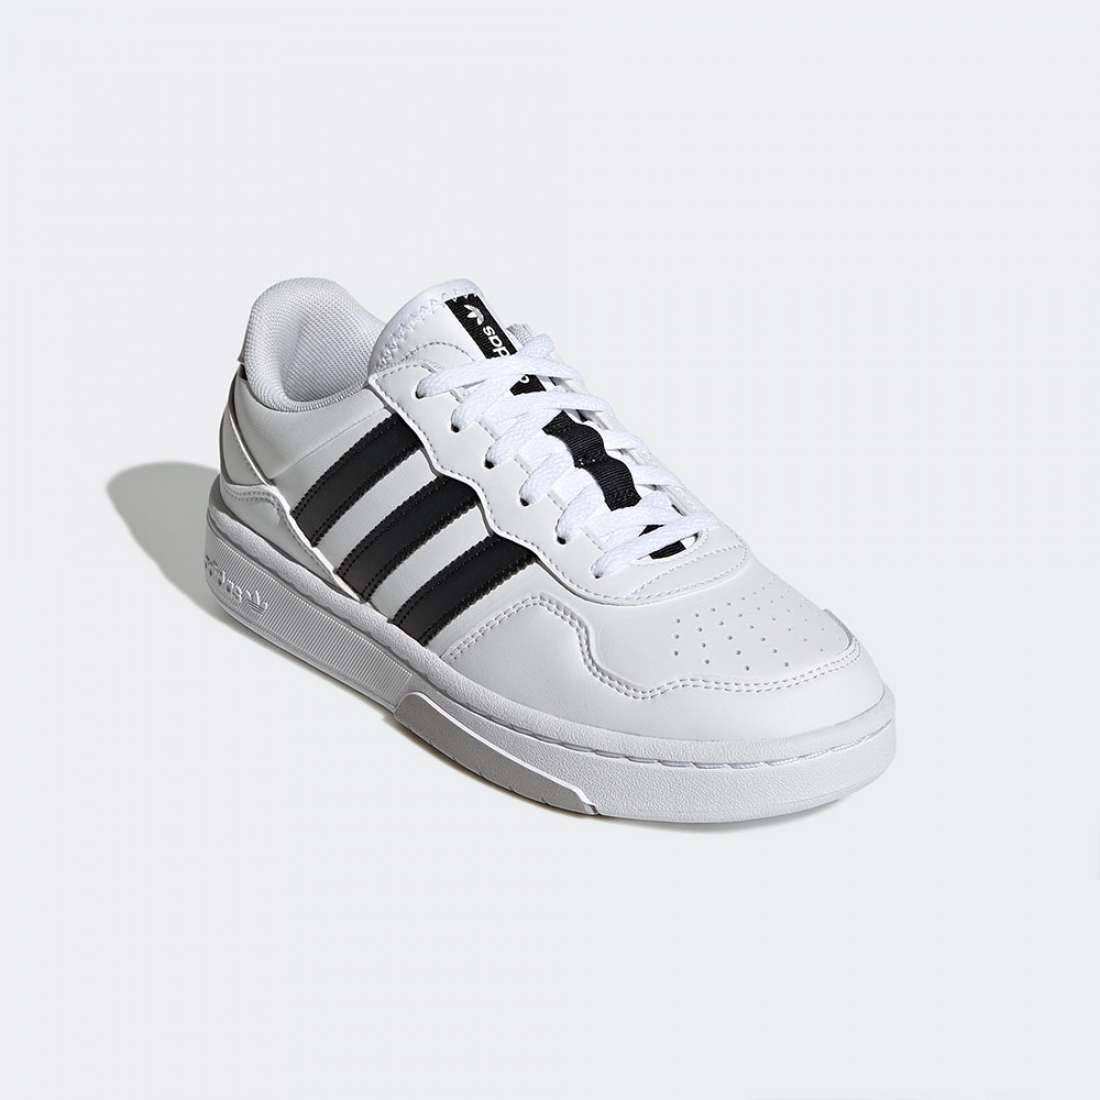 ADIDAS COURTIC FTWWHT/GRETWO/BLACK